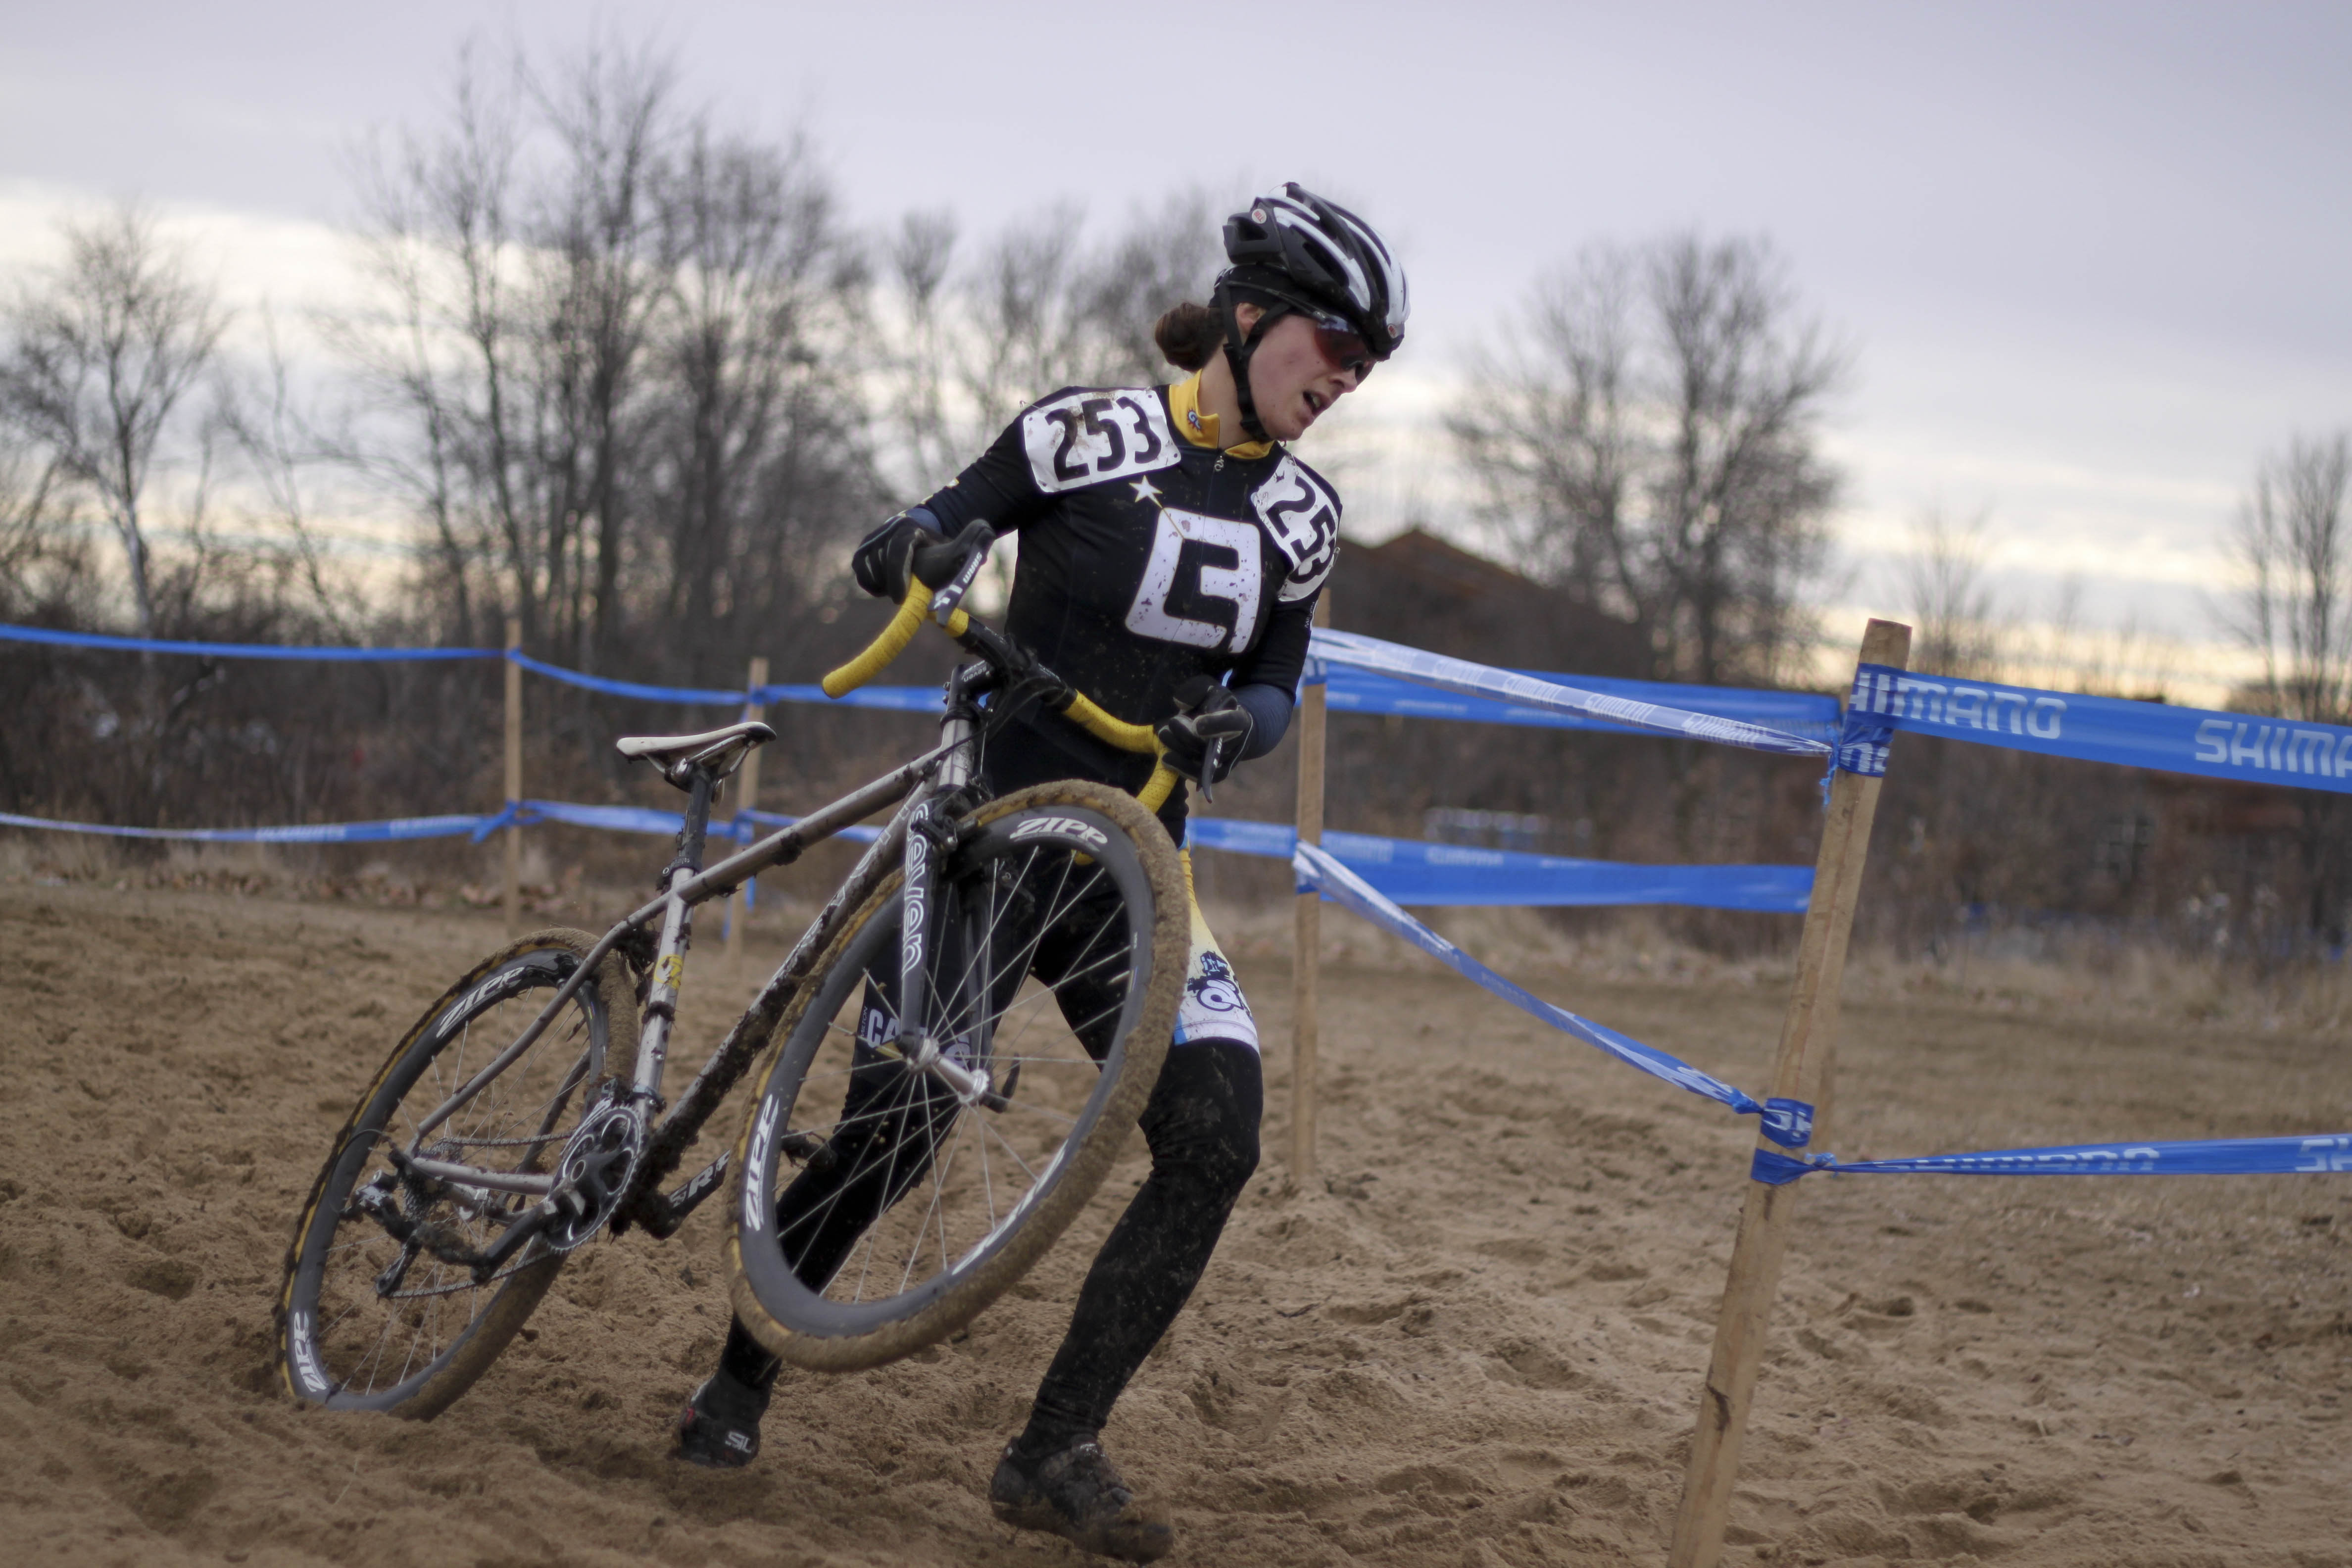 Andrea Smith was predicted to win the event, and did so in impressive fashion over a minute ahead of second place.. © Cyclocross Magazine